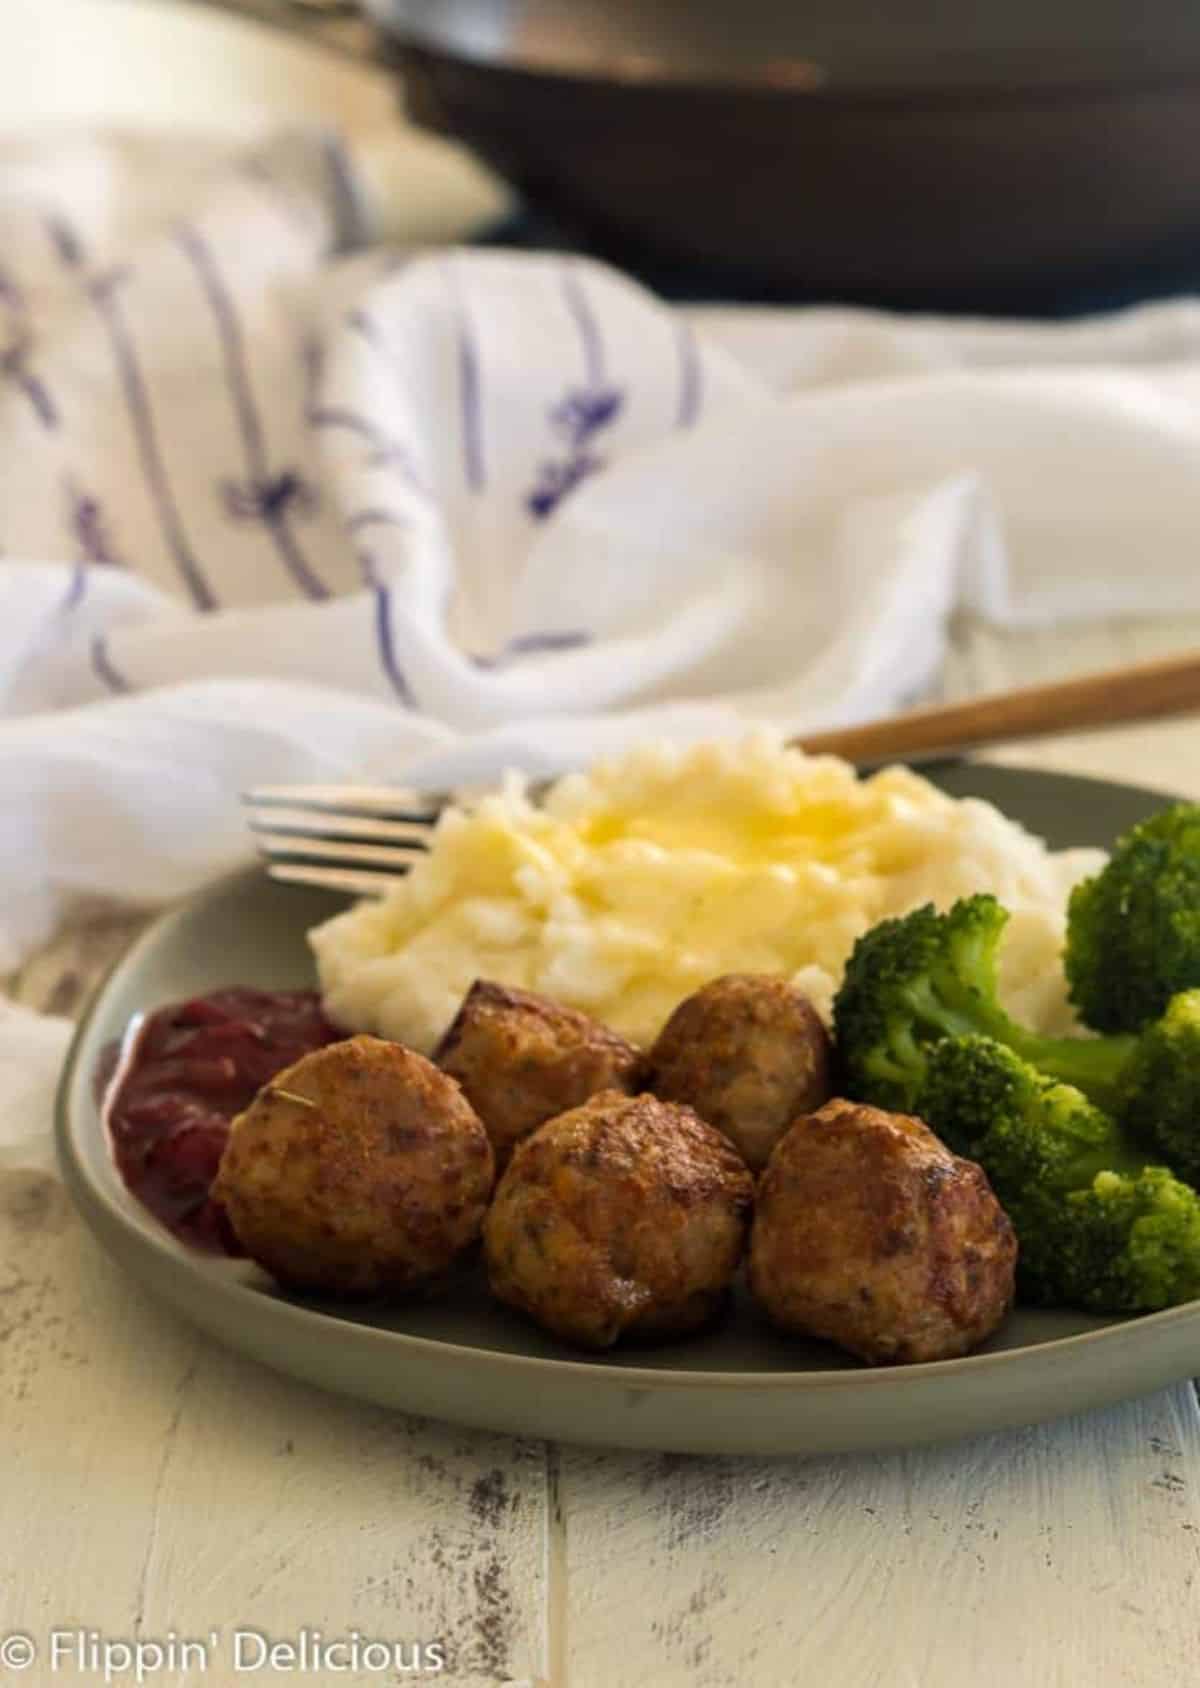 Gluten-Free Meatballs with broccoli and mashed potatoes on a gray plate.